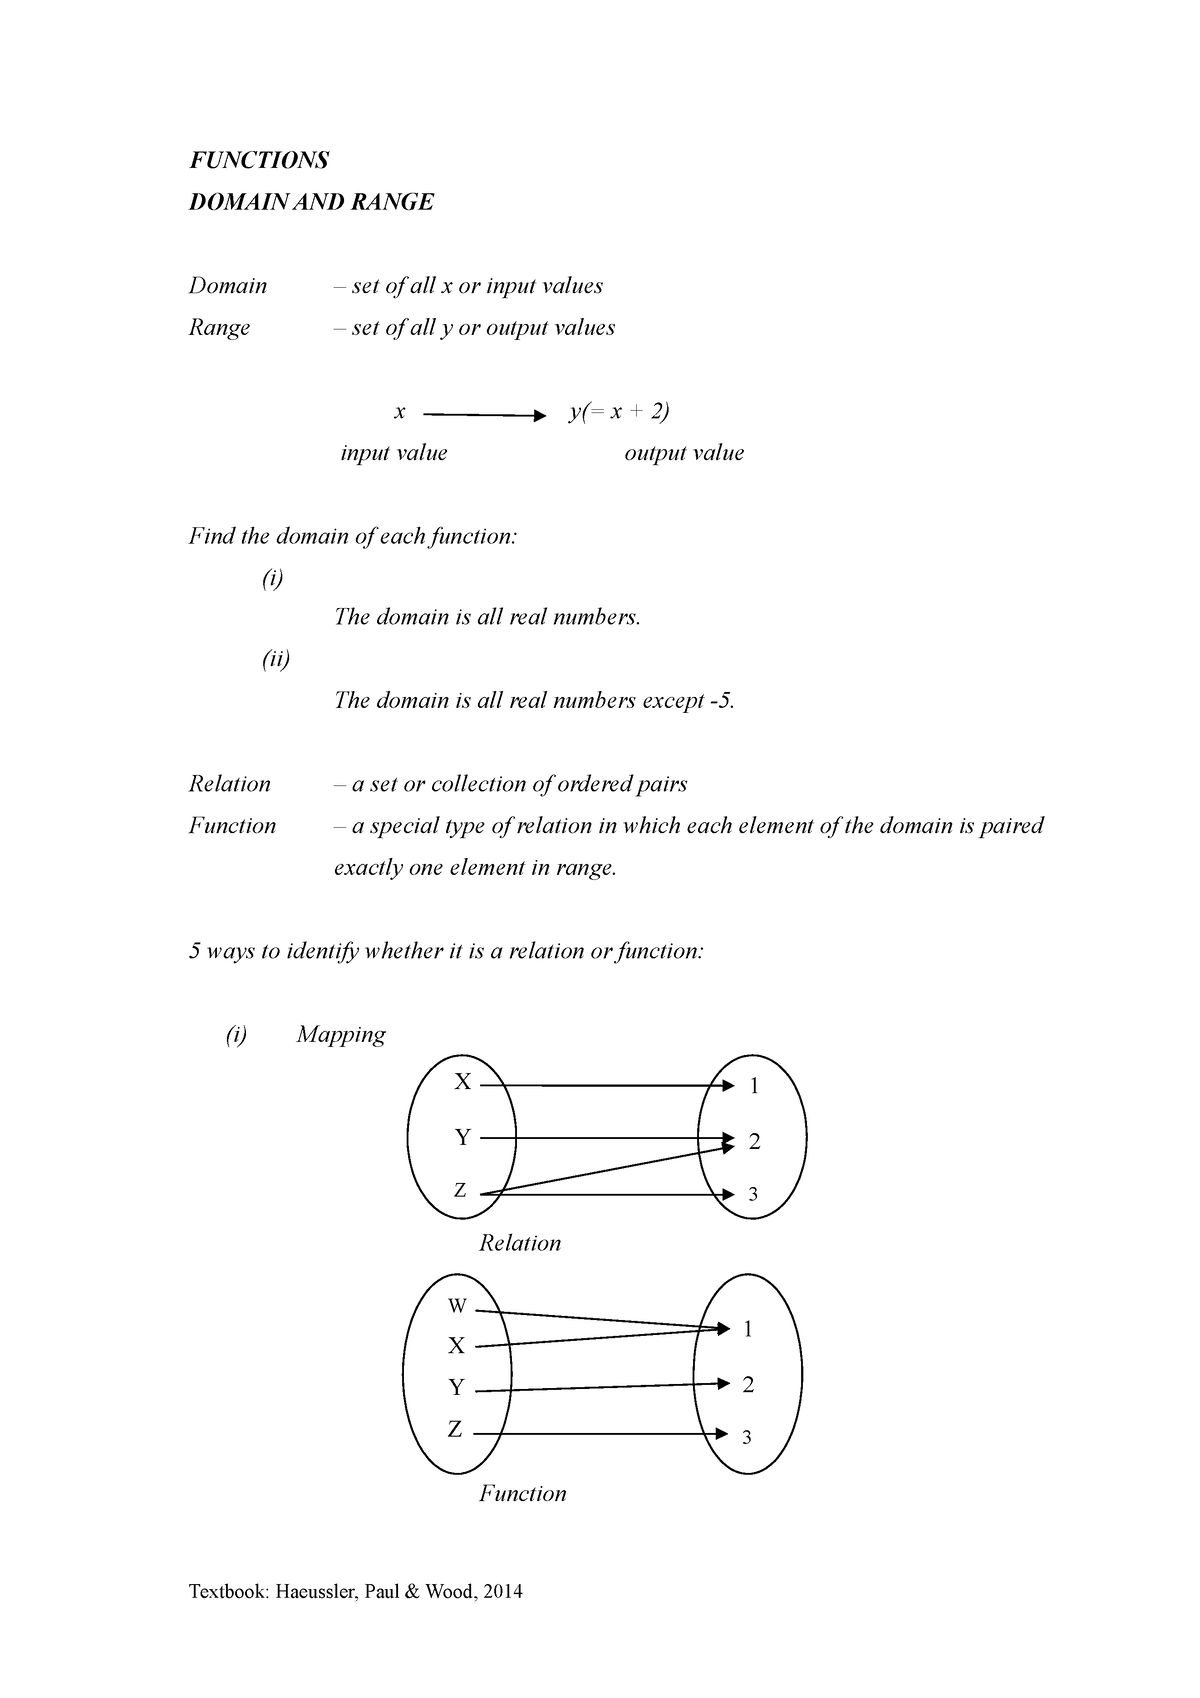 notes-functions-1-functions-domain-and-range-domain-set-of-all-x